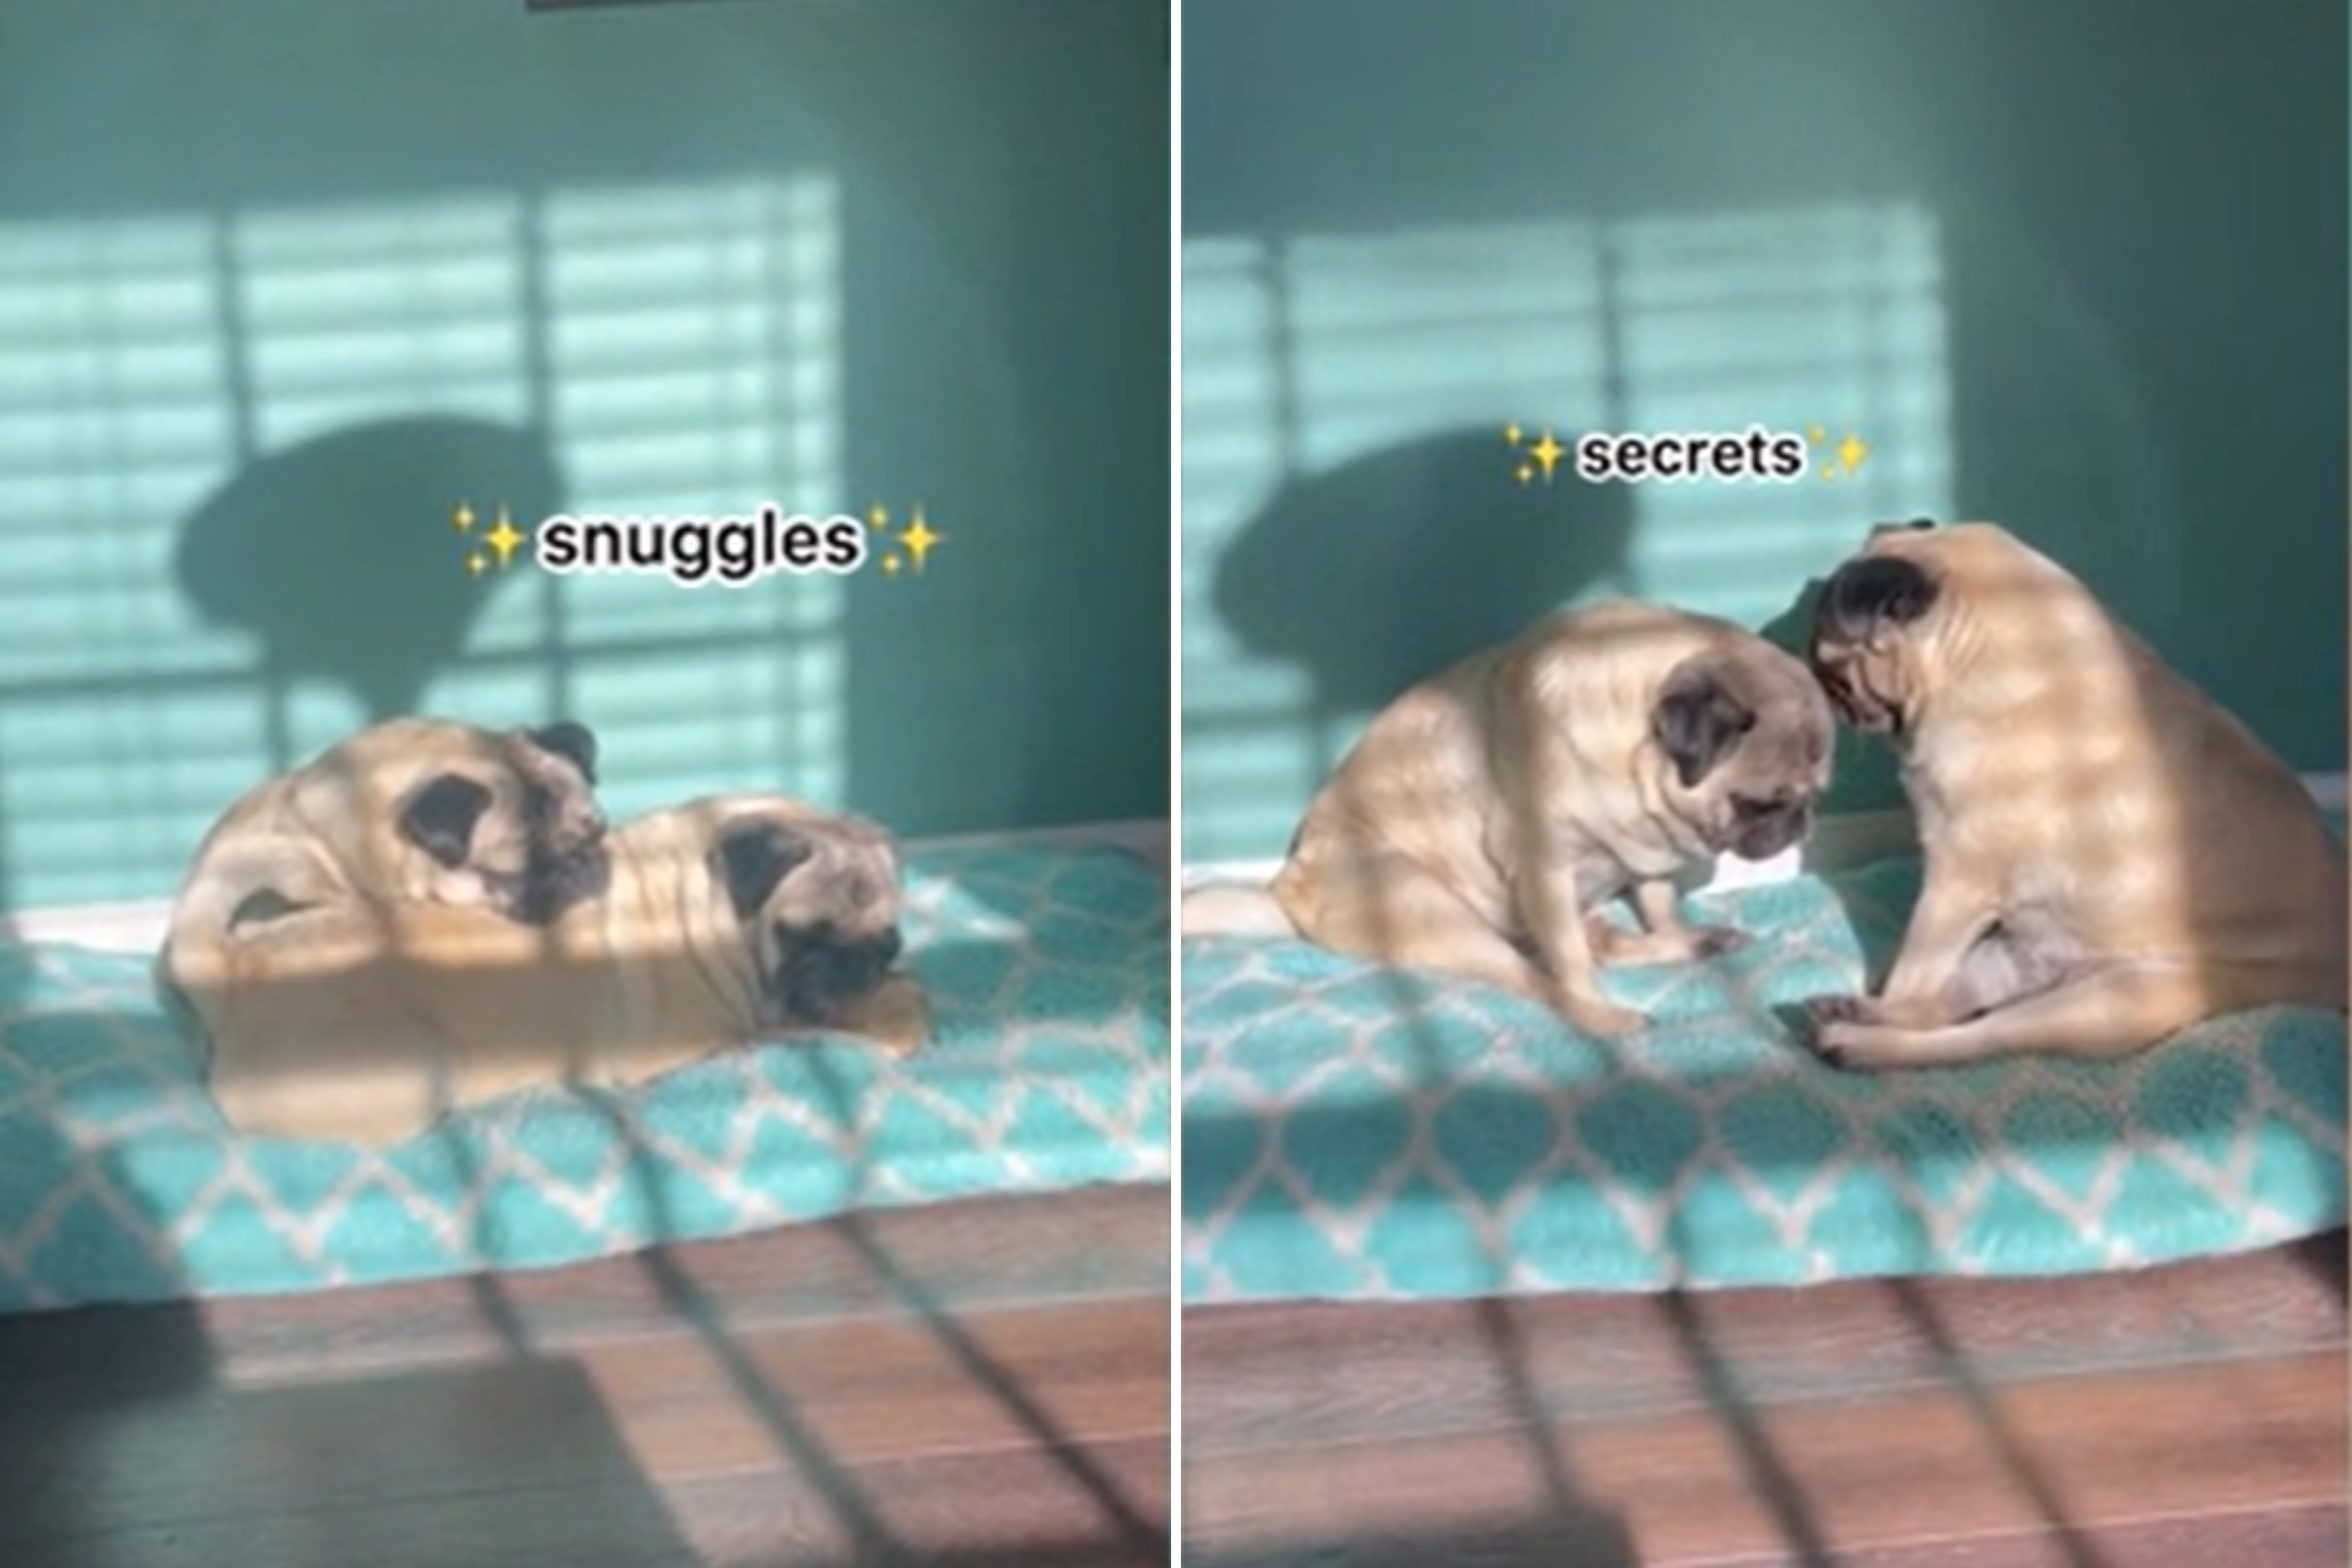 Pug Sisters Sharing Secrets and Snuggles Will Tug on Your Heartstrings image